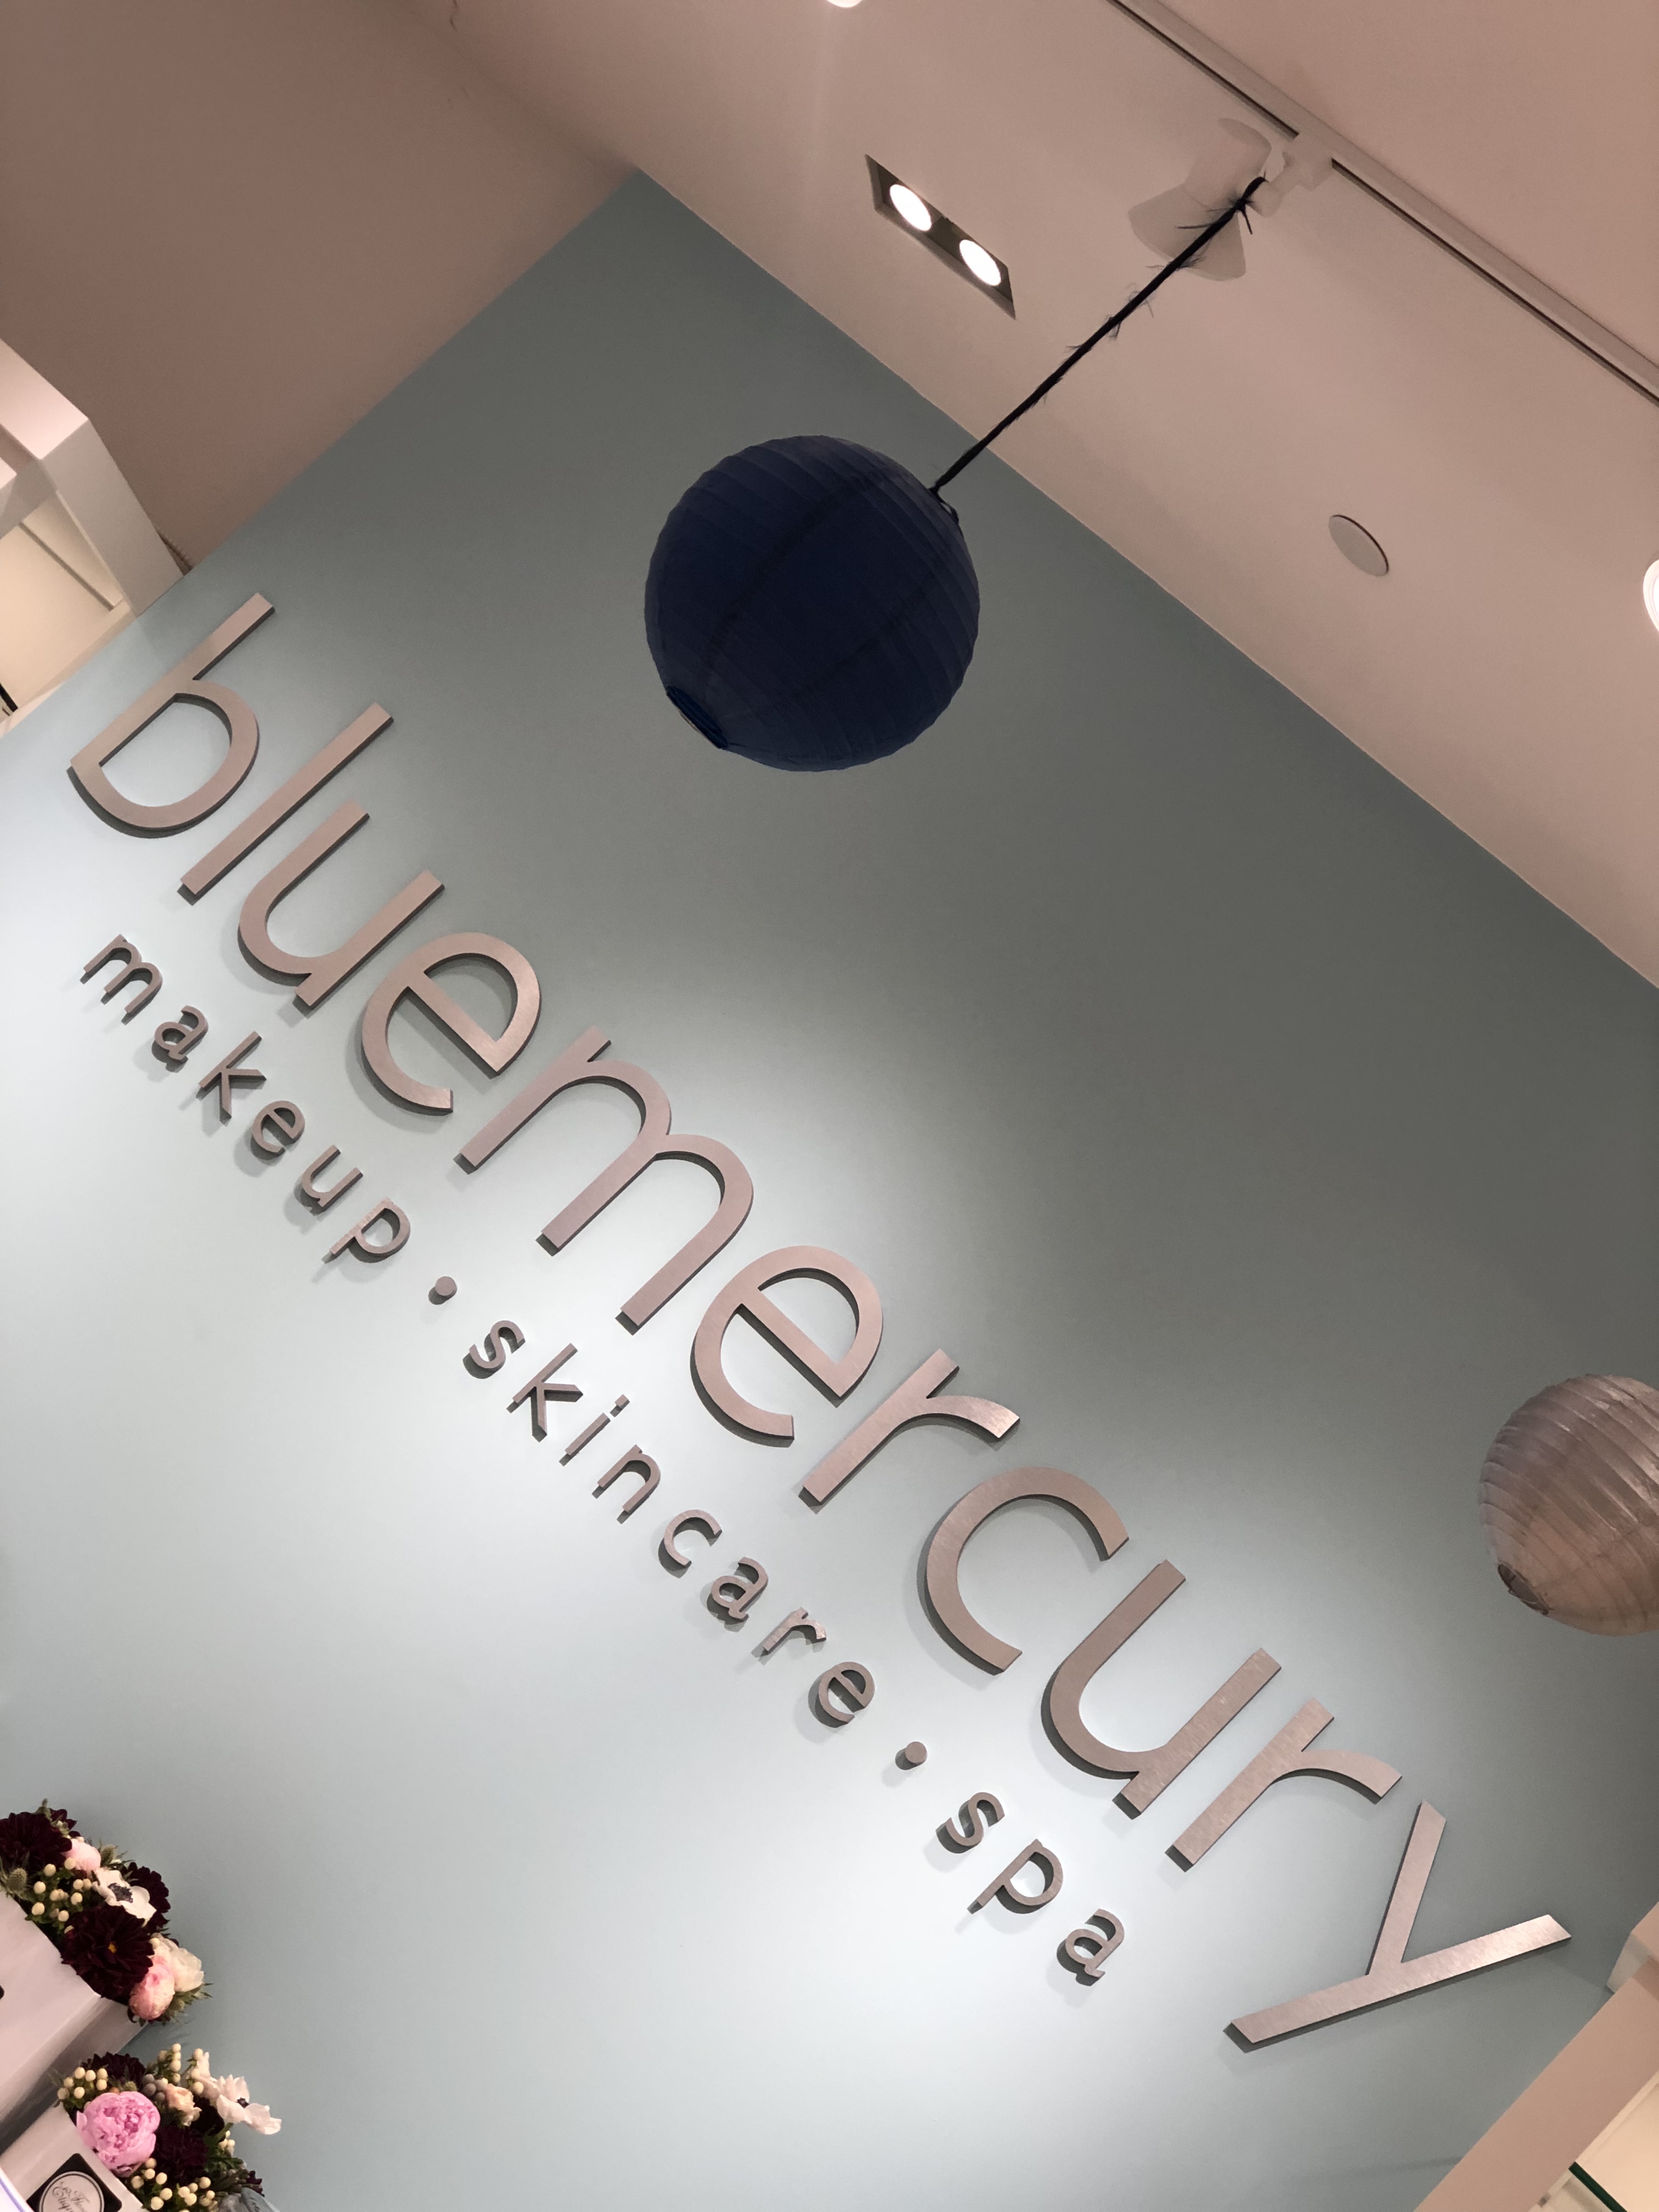 Bluemercury At Westlake Plaza Has Everything For Beauty Junkies